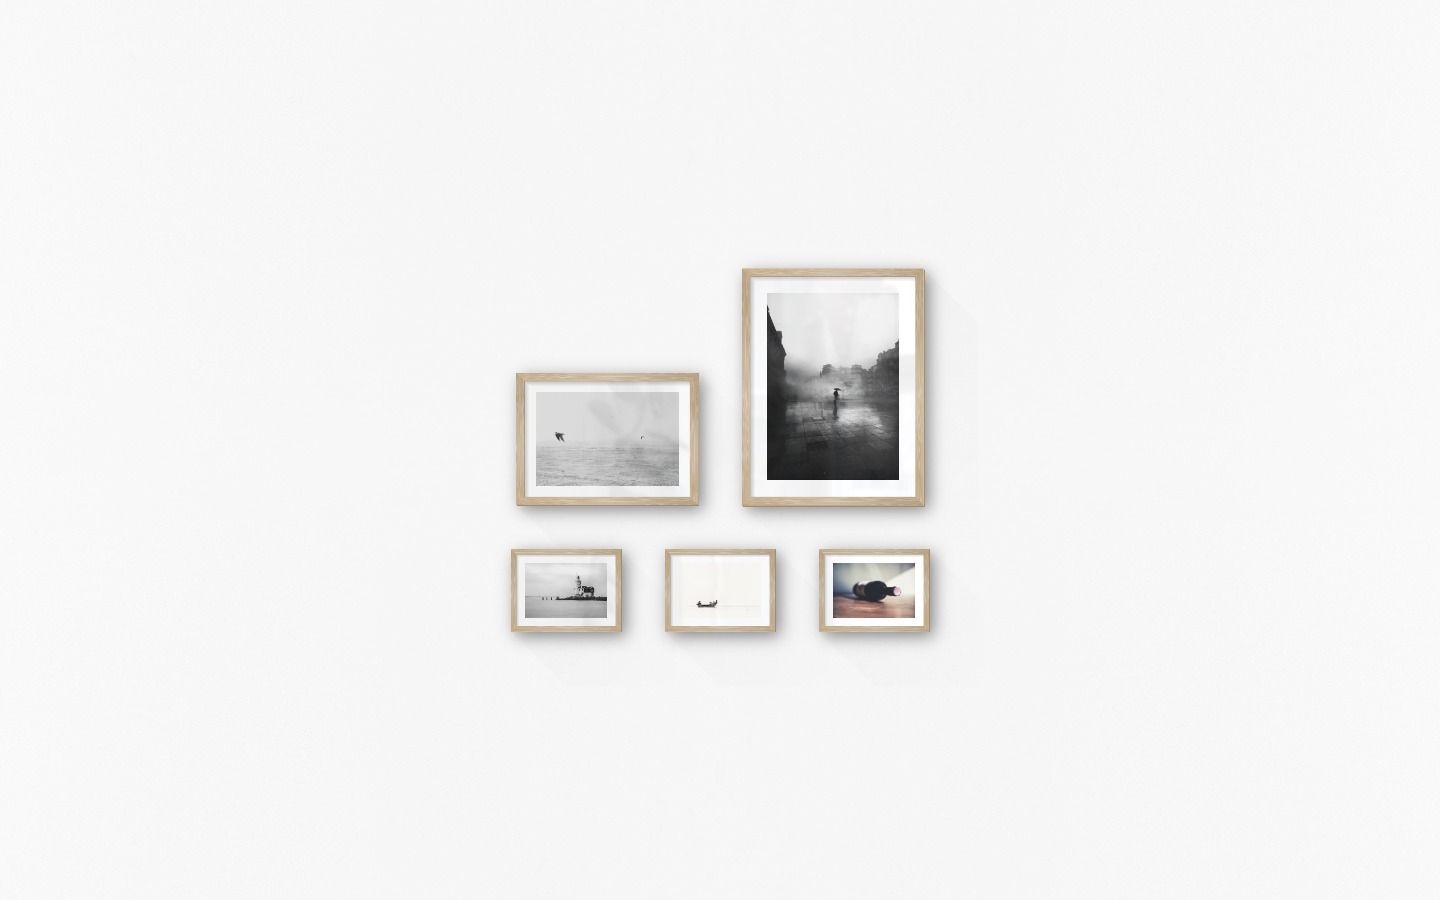 Gallery wall with picture frames in wood in sizes 21x30, 30x40 and 13x18 with prints "Birds over the sea", "Rainy city", "Pier with building", "People in boat" and "Wine bottle on table"